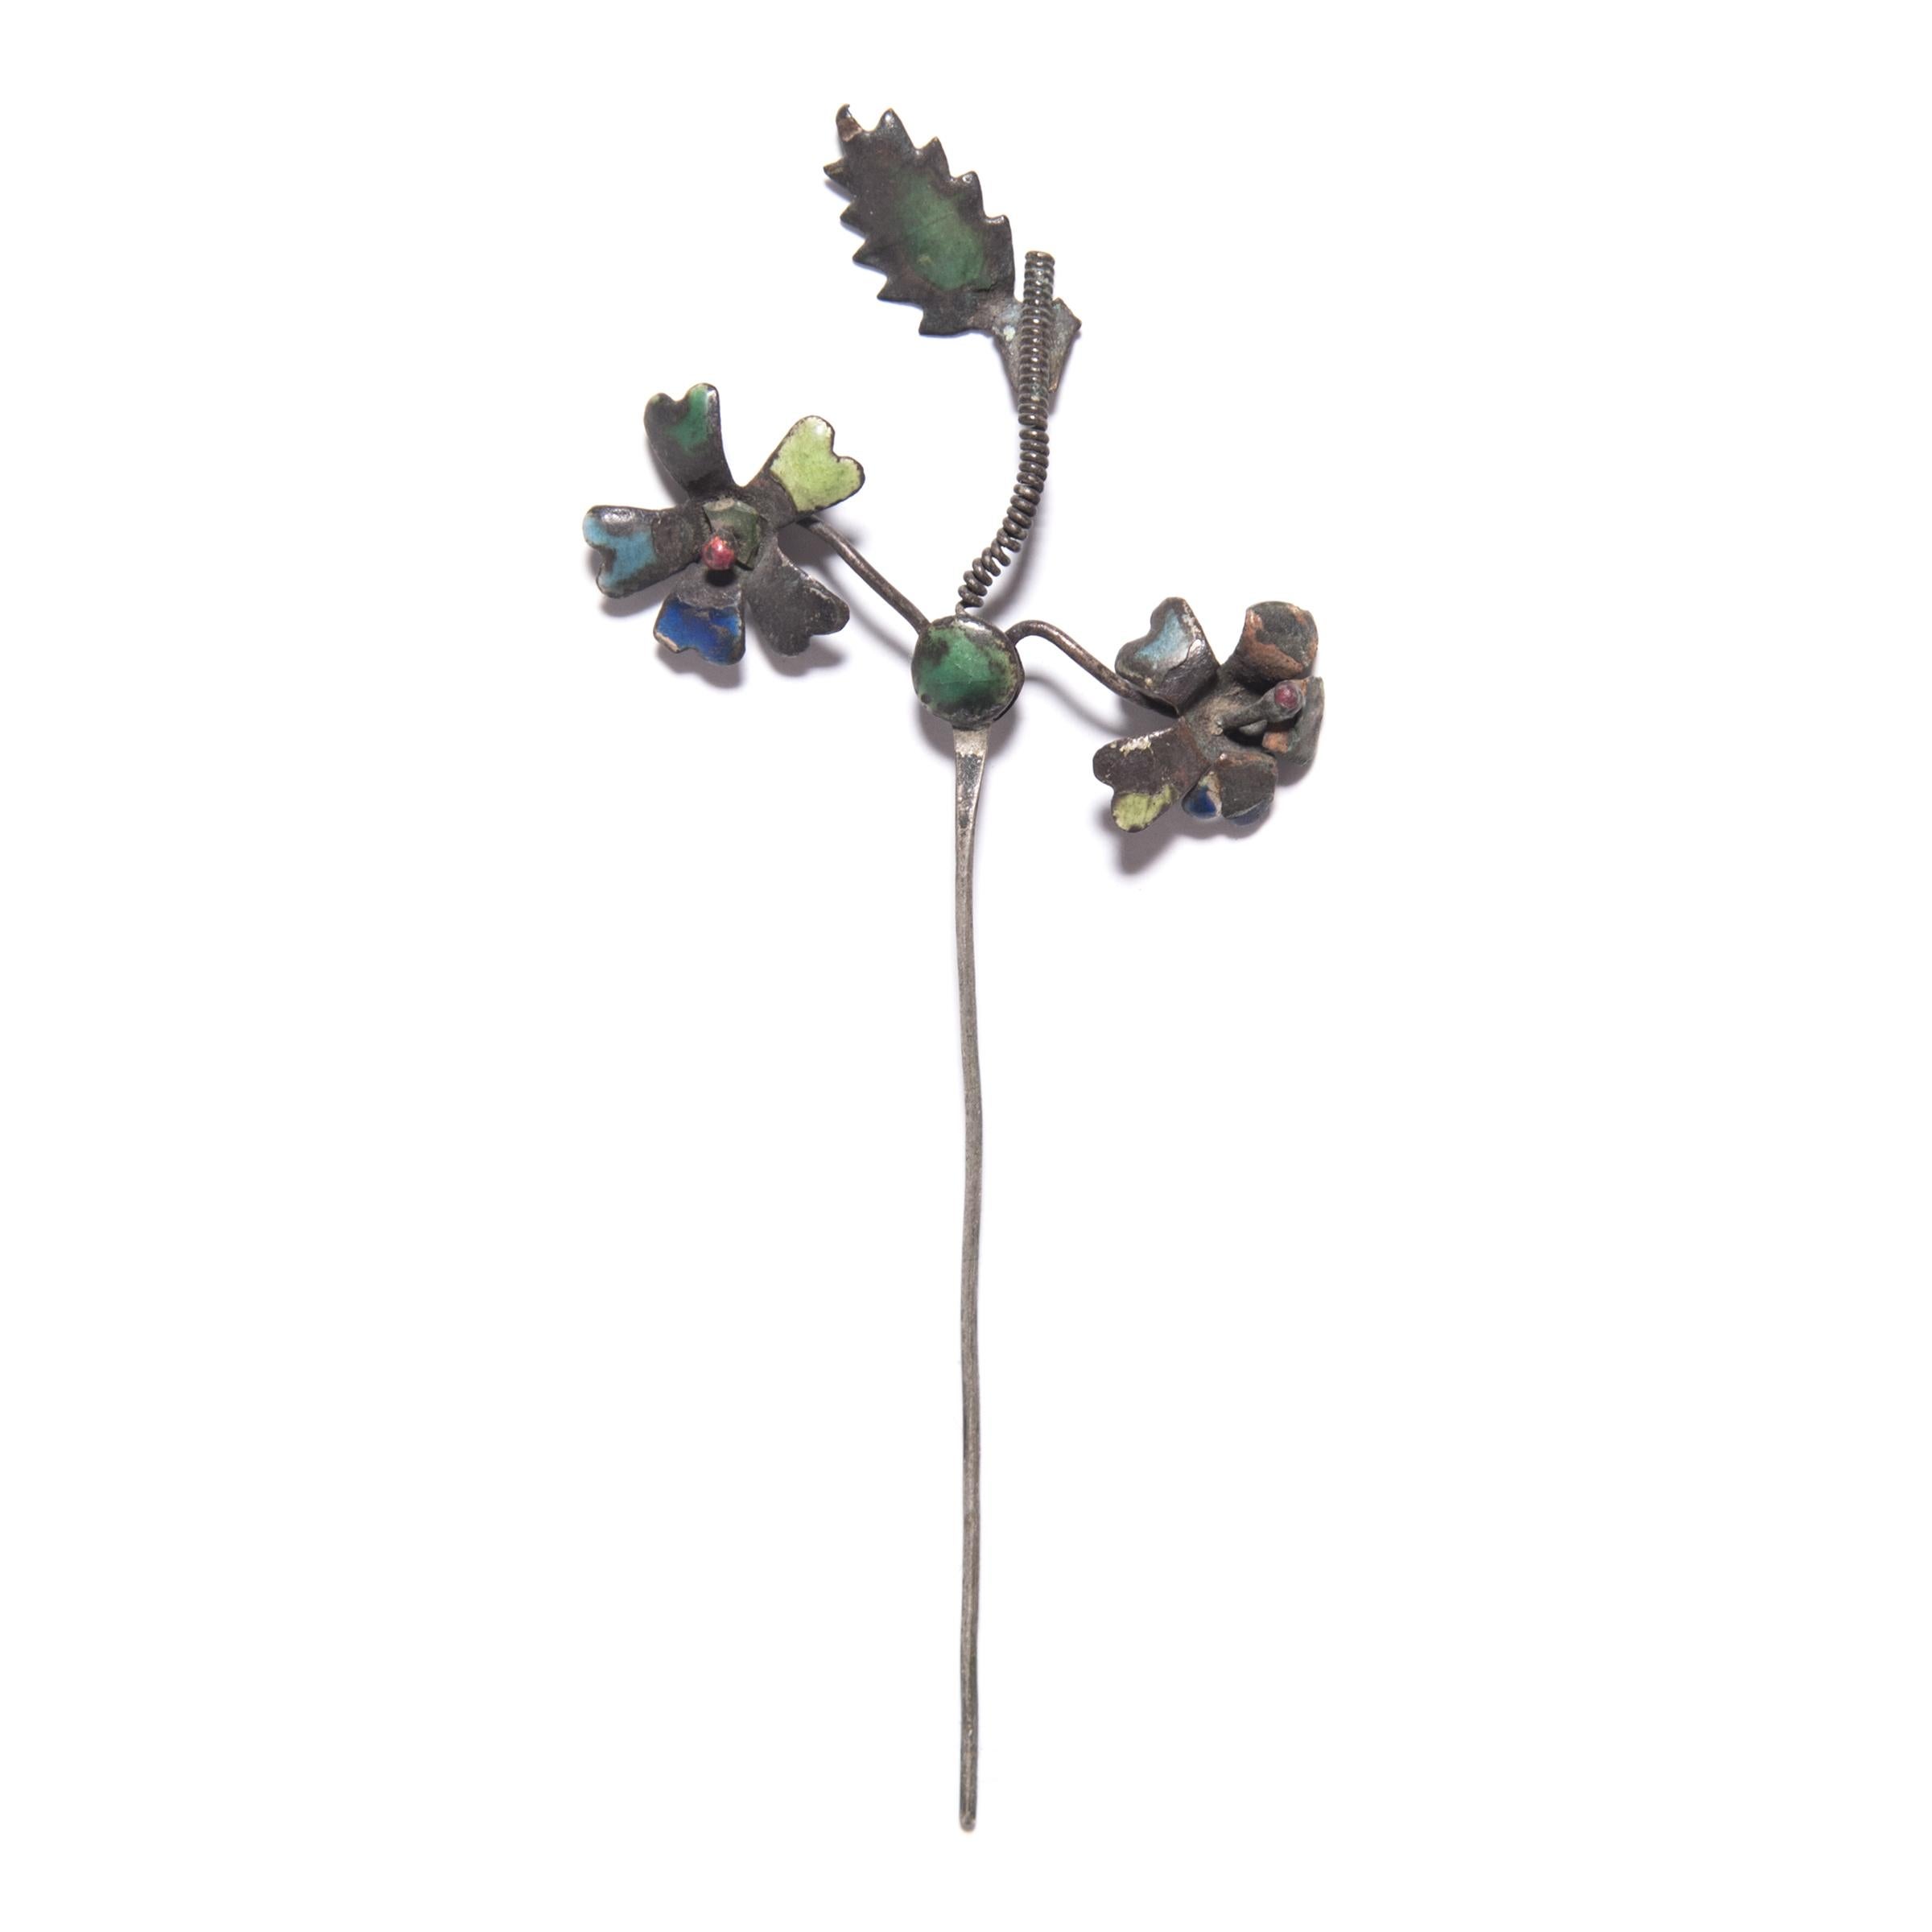 Qing 19th Century Chinese Enameled Floral Hairpin